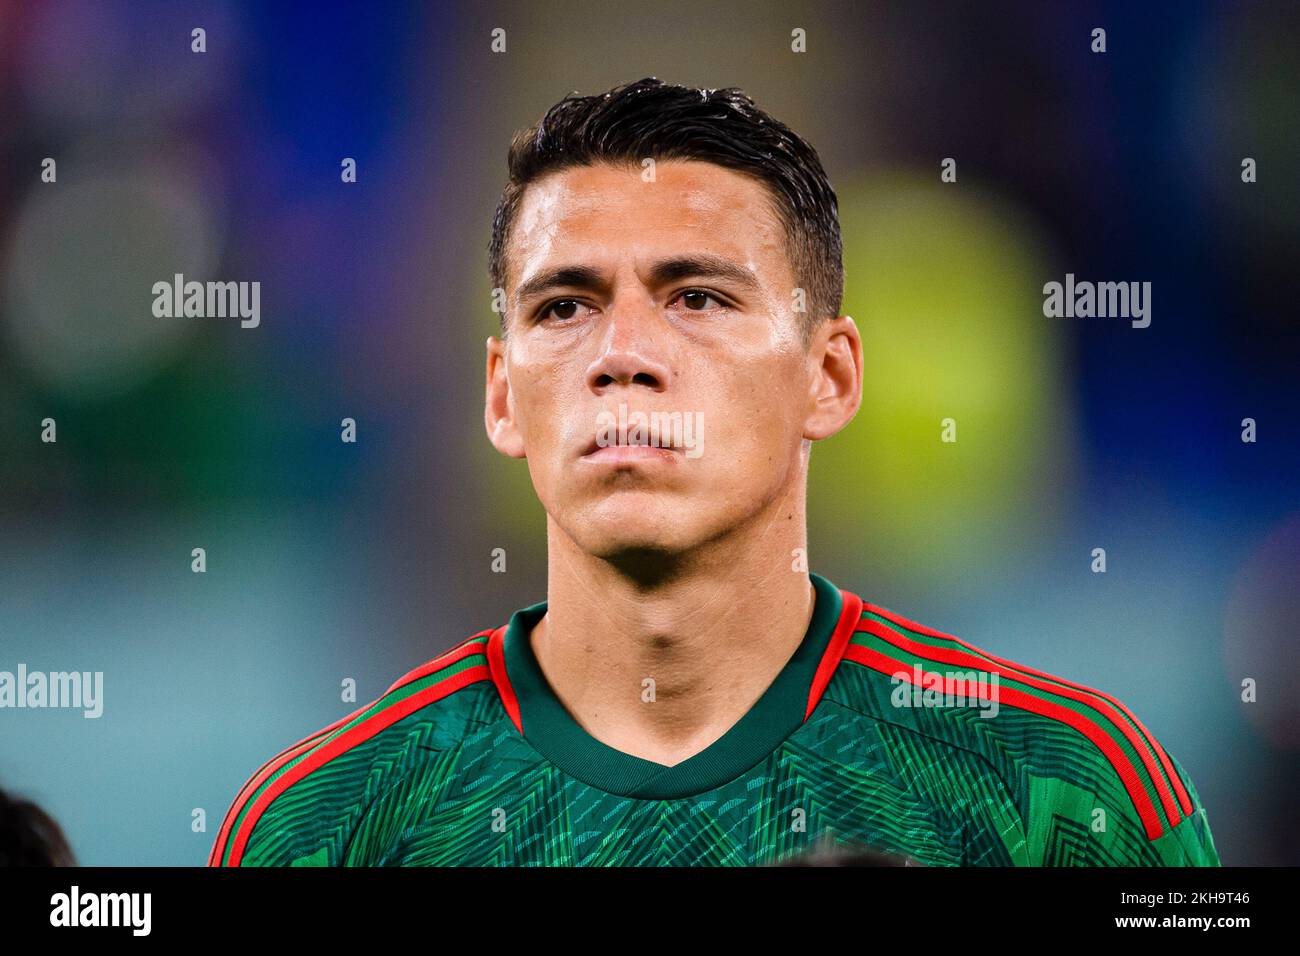 Doha, Qatar. 22nd Nov, 2022. 974 Stadium Portrait Hector Moreno of Mexico before the match between Mexico and Poland, valid for the group stage of the World Cup, held at 974 Stadium in Doha, Qatar. (Marcio Machado/SPP) Credit: SPP Sport Press Photo. /Alamy Live News Stock Photo